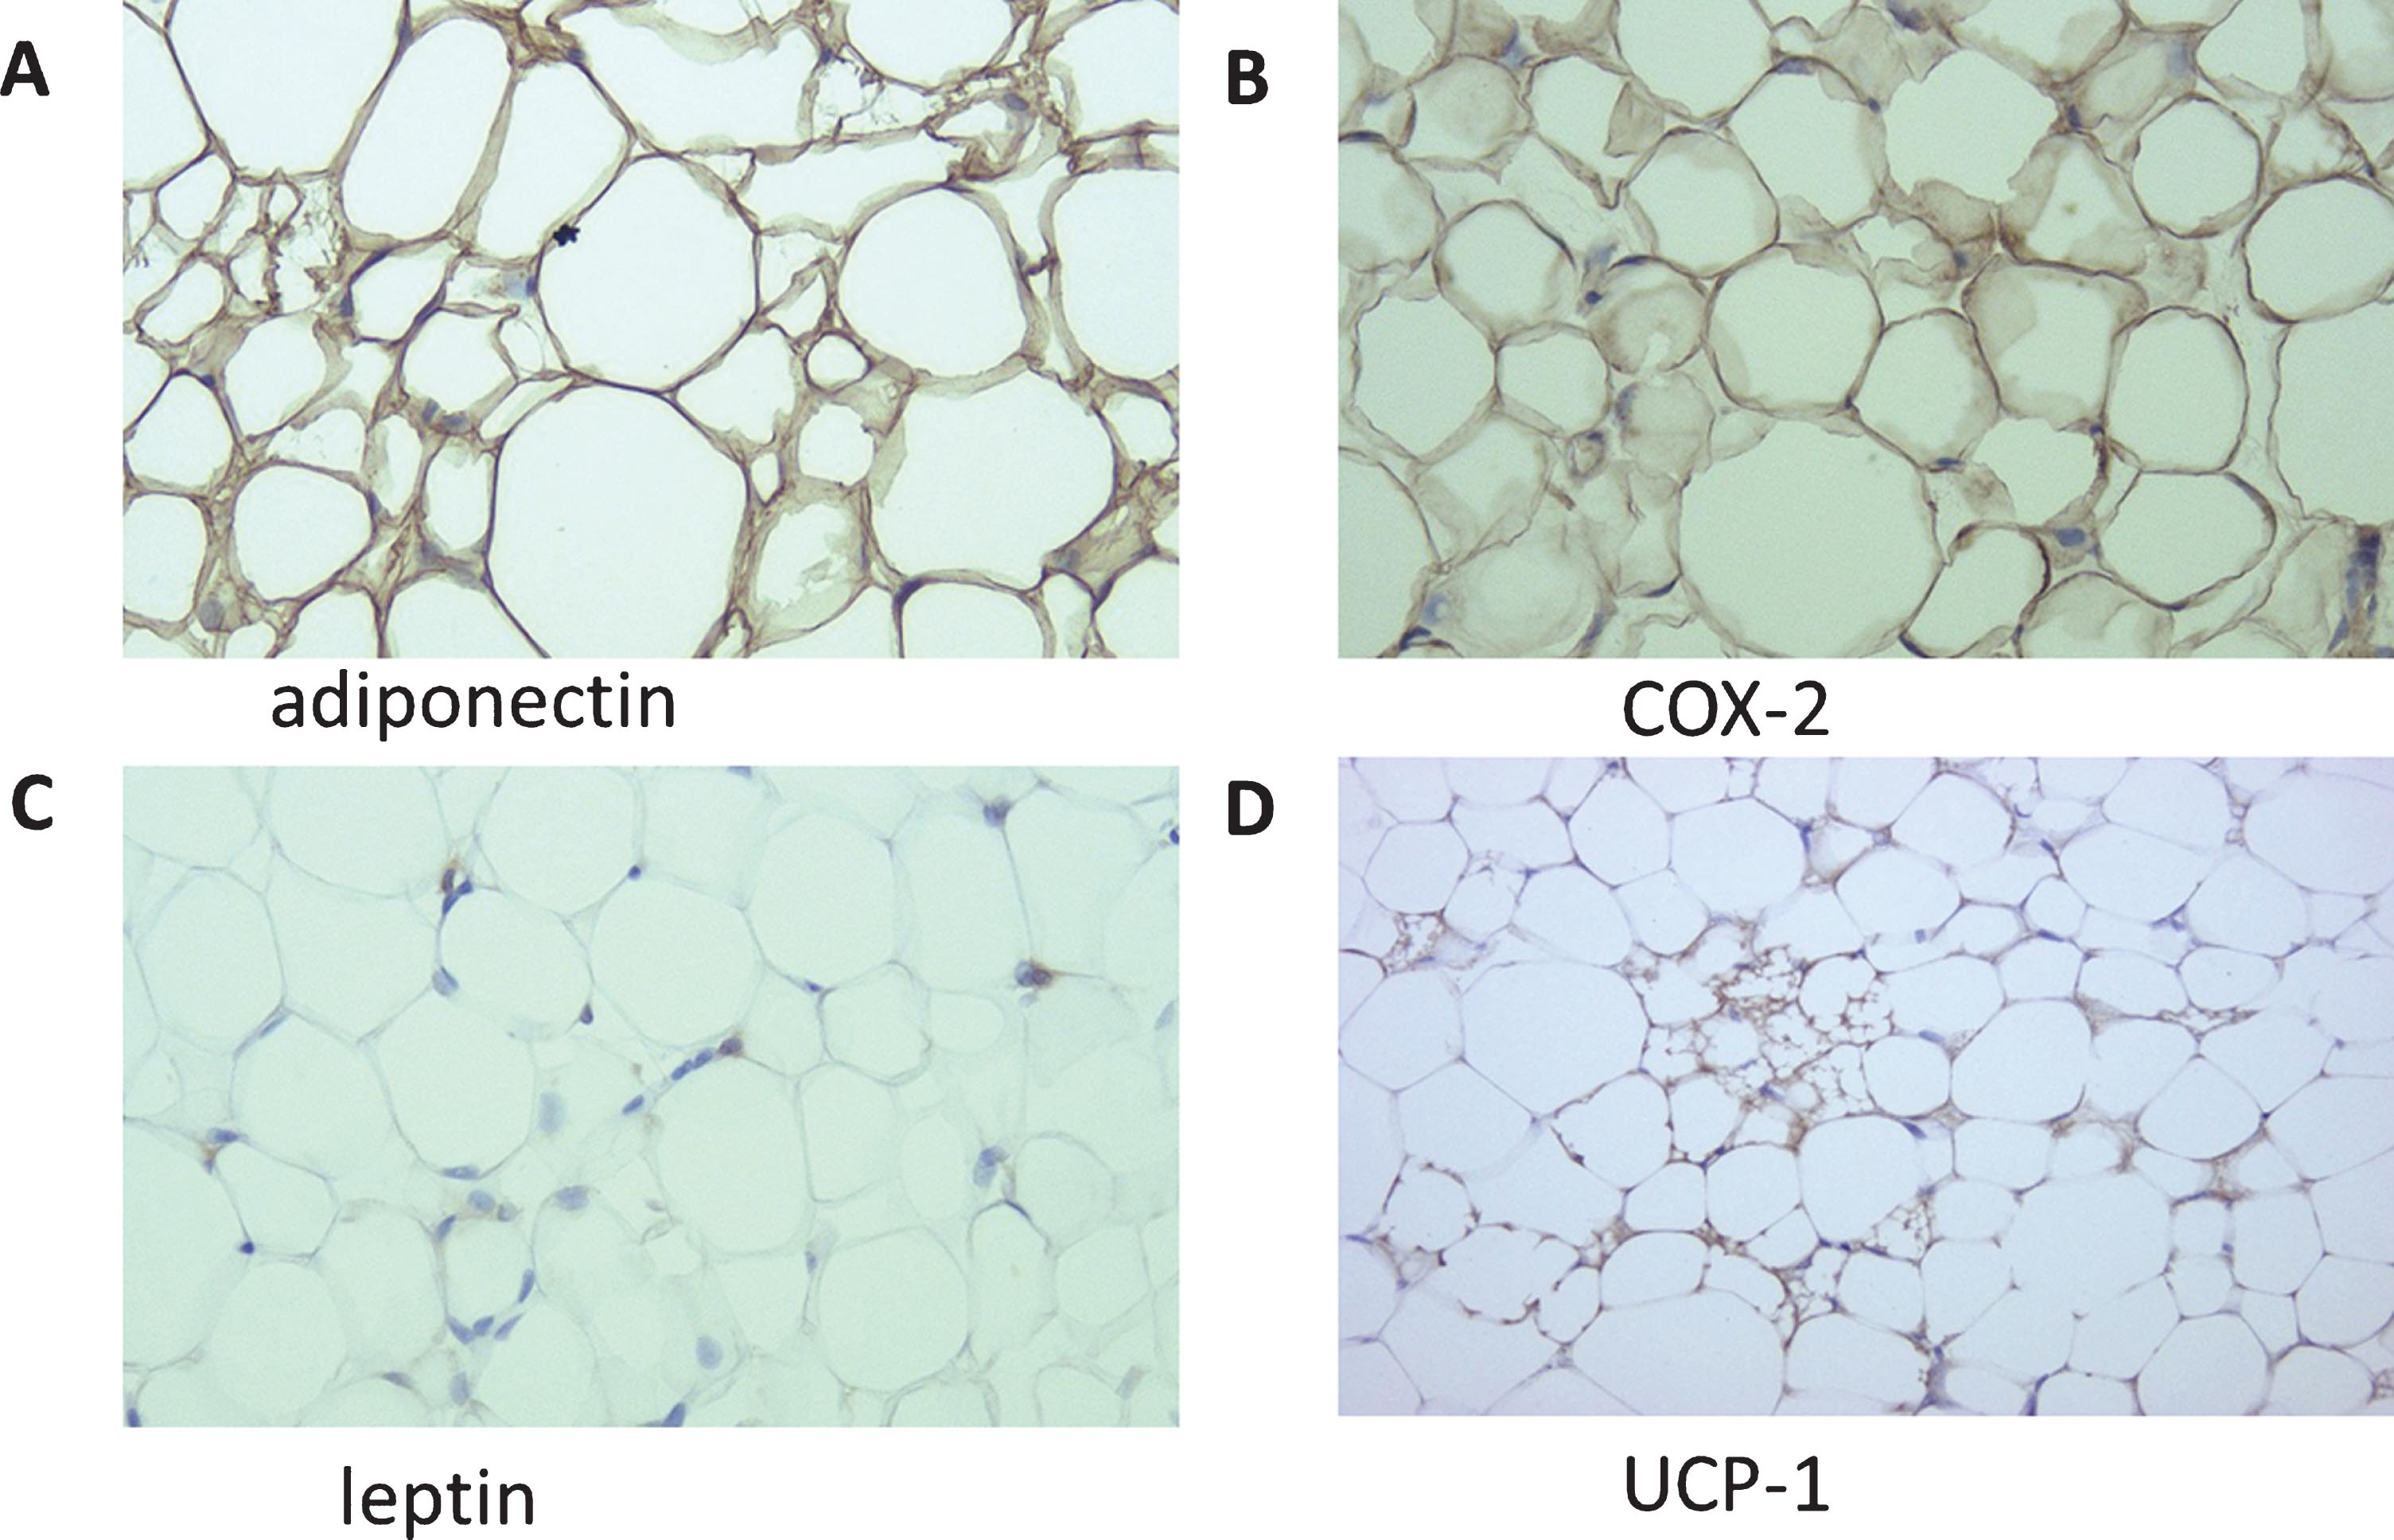 Immunohistochemistry of adiponectin (A), COX-2 (B), leptin (C), and UCP1 (D) in perirenal fat (original magnification: 200×).